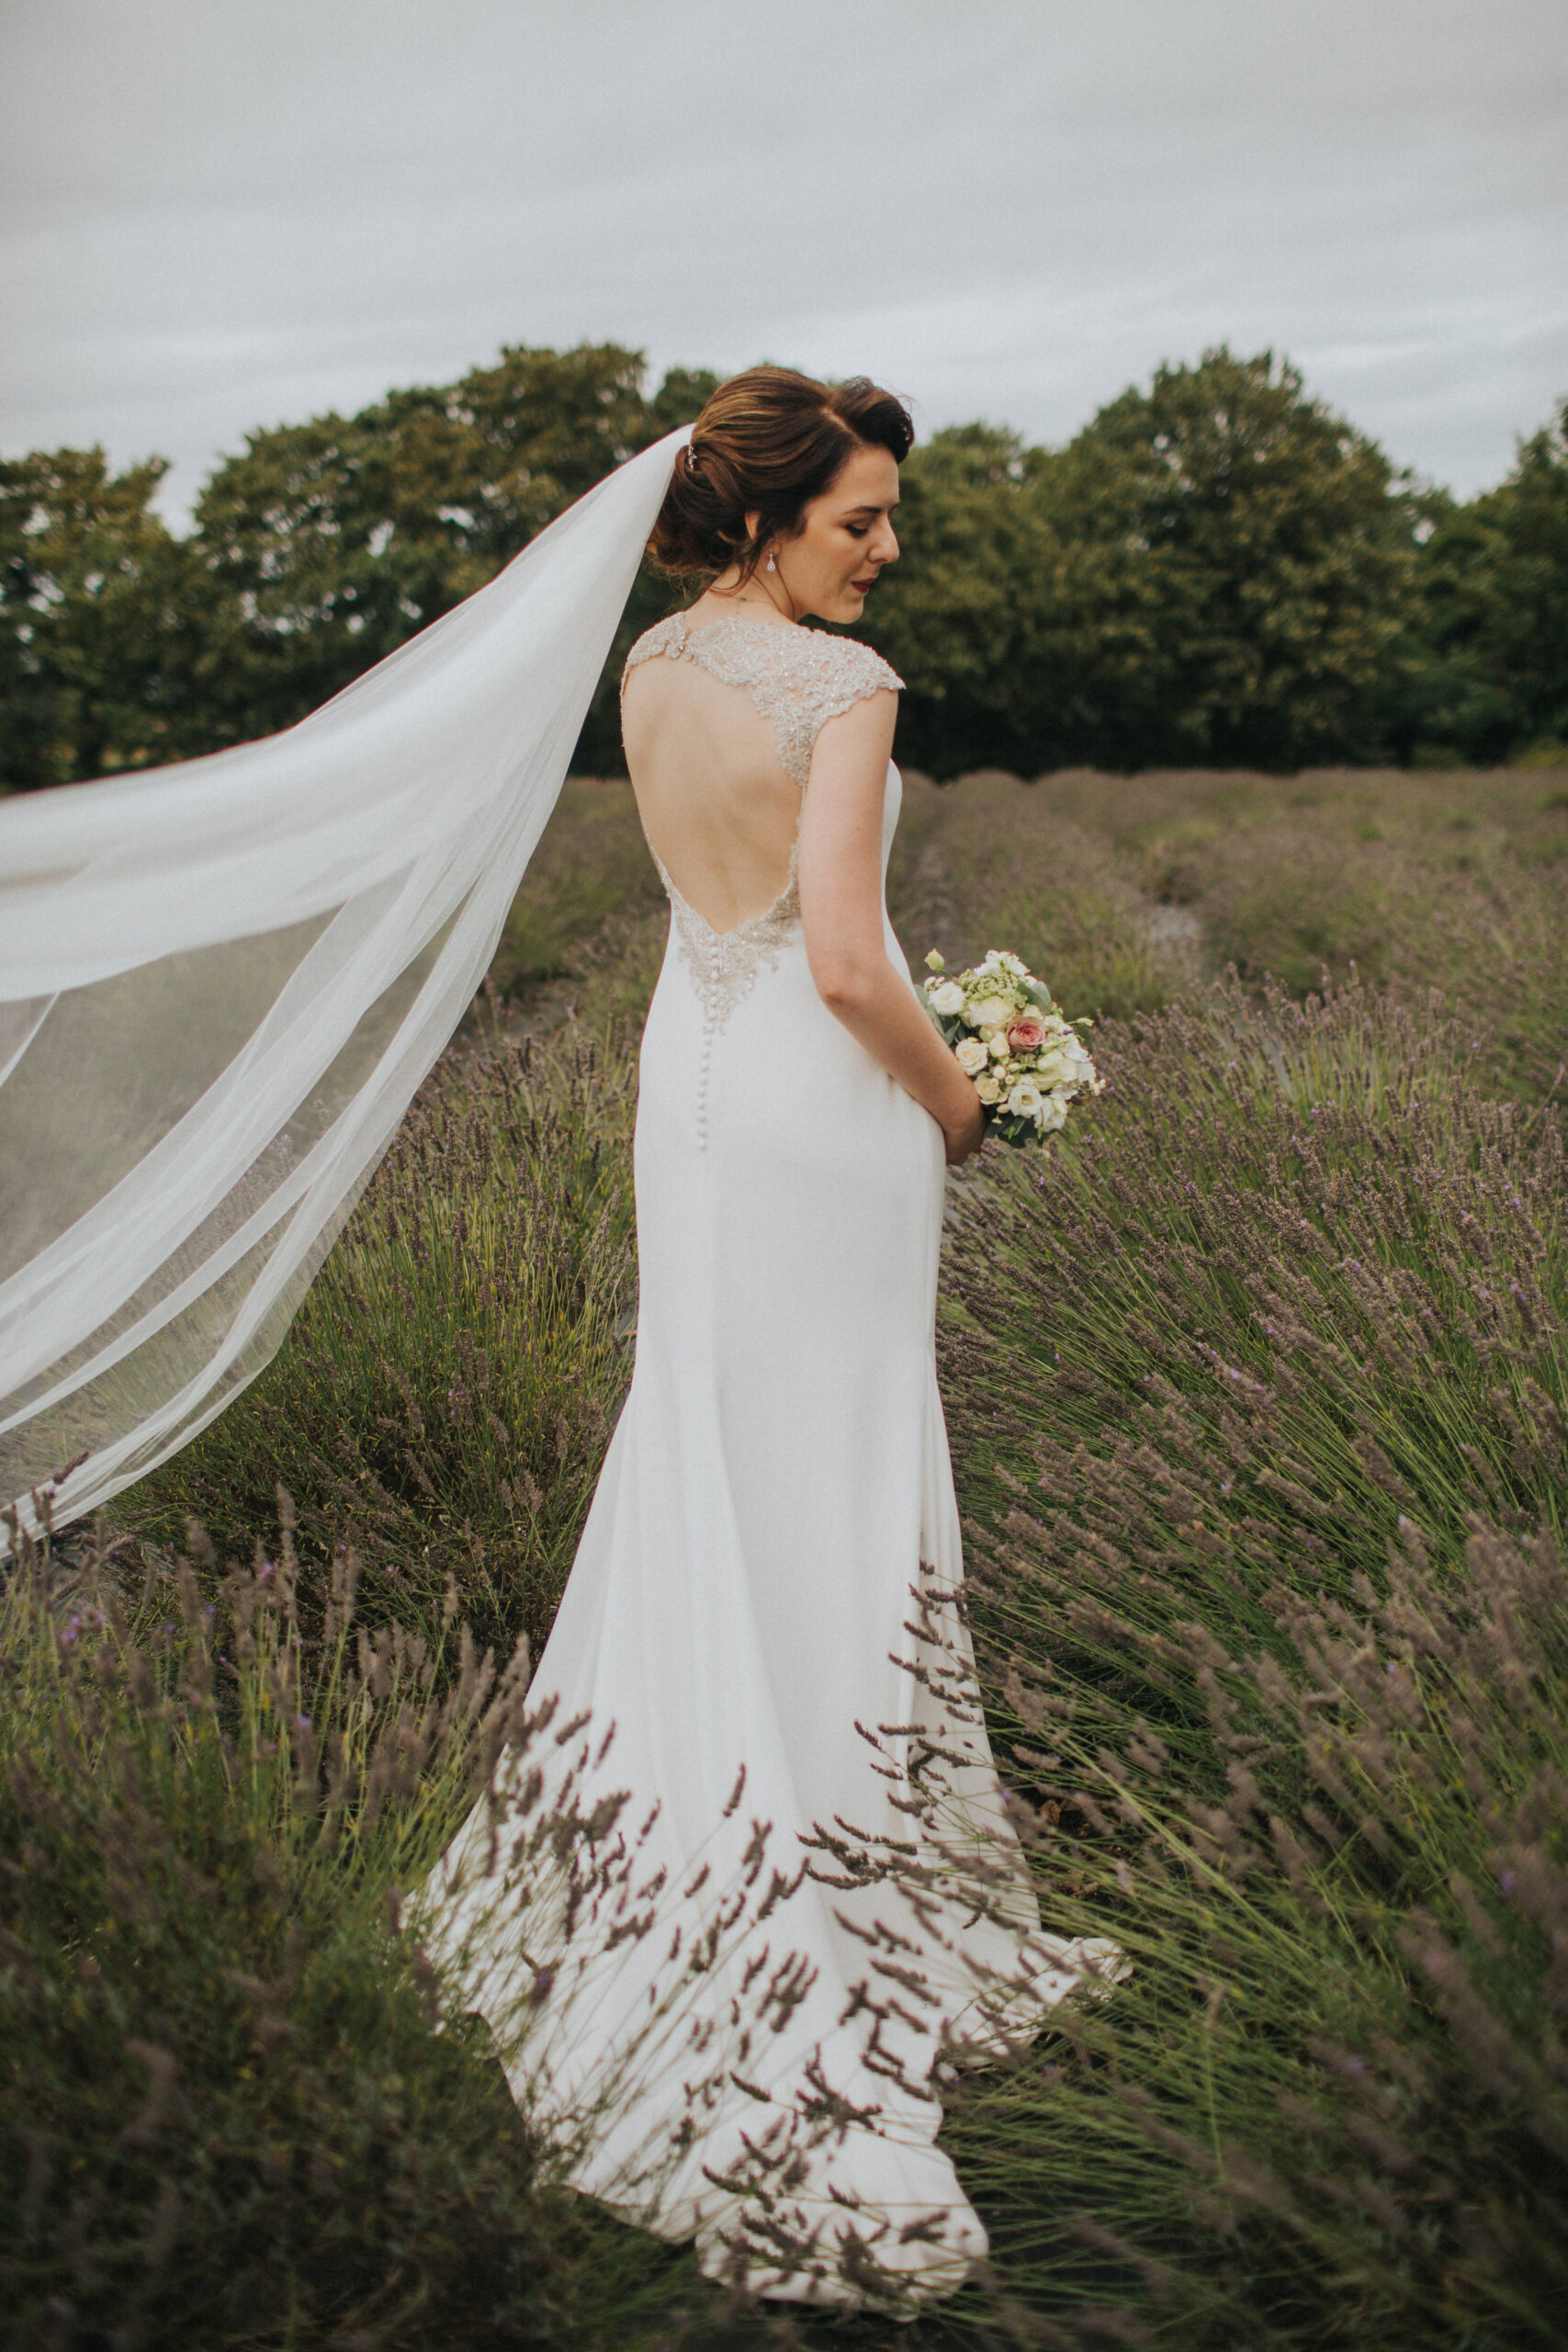 Bride's stunning gown complemented by the summer hues